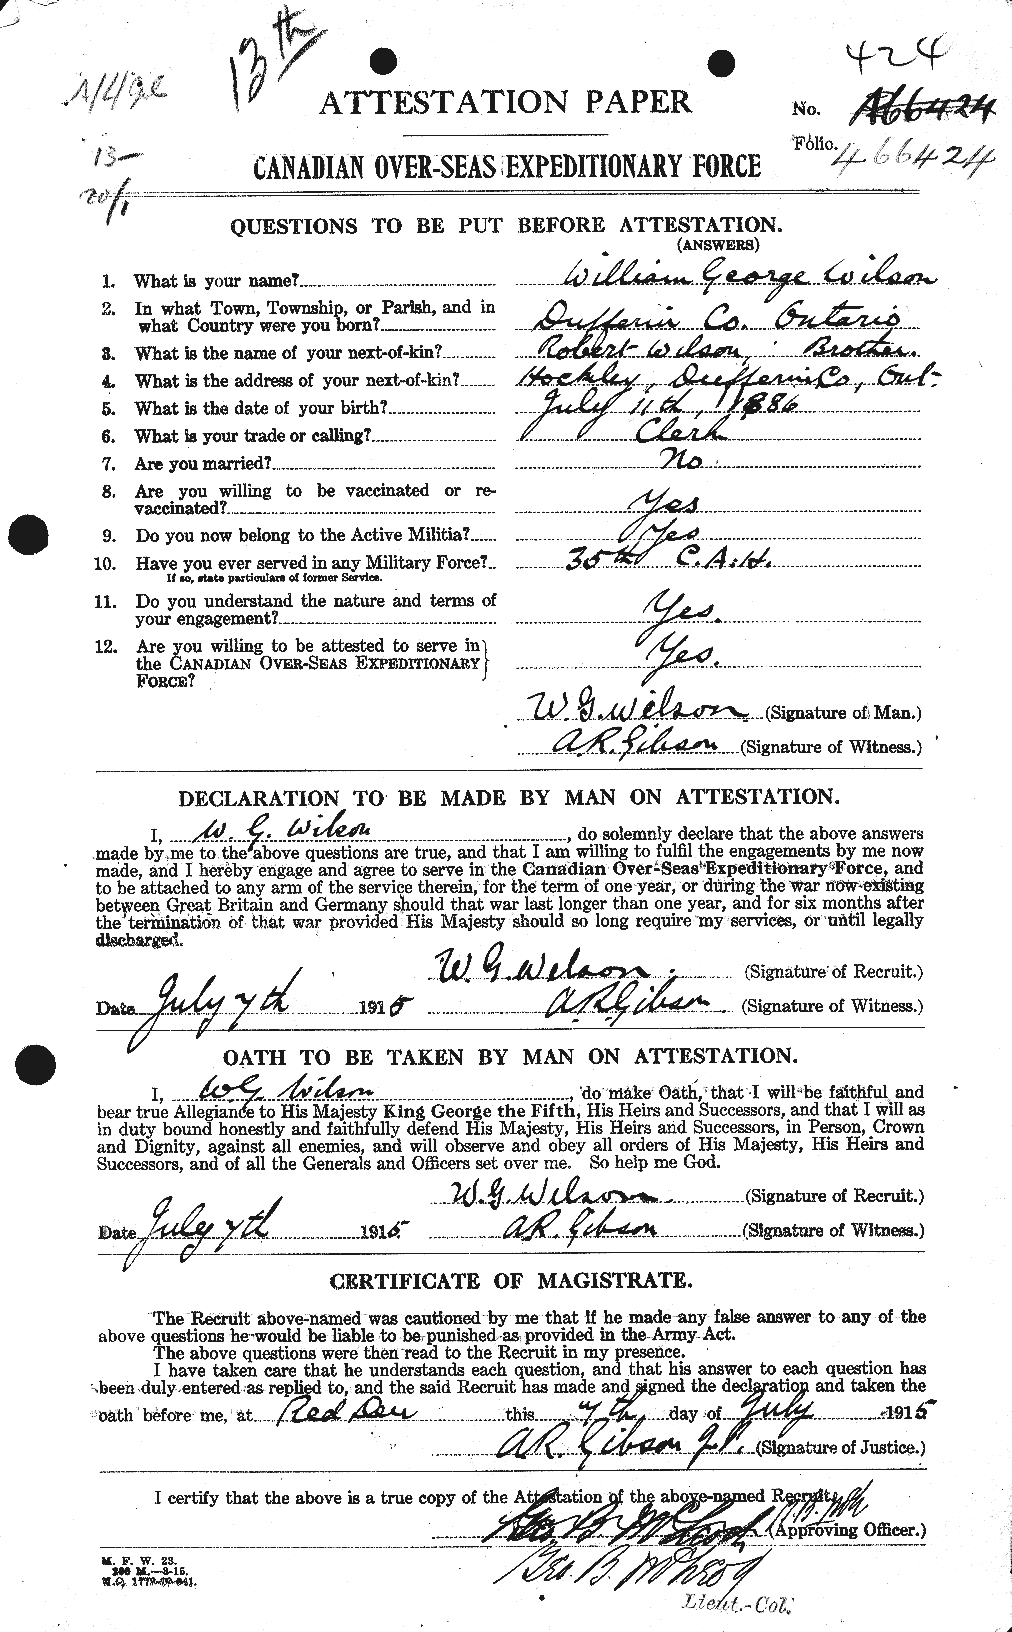 Personnel Records of the First World War - CEF 682001a